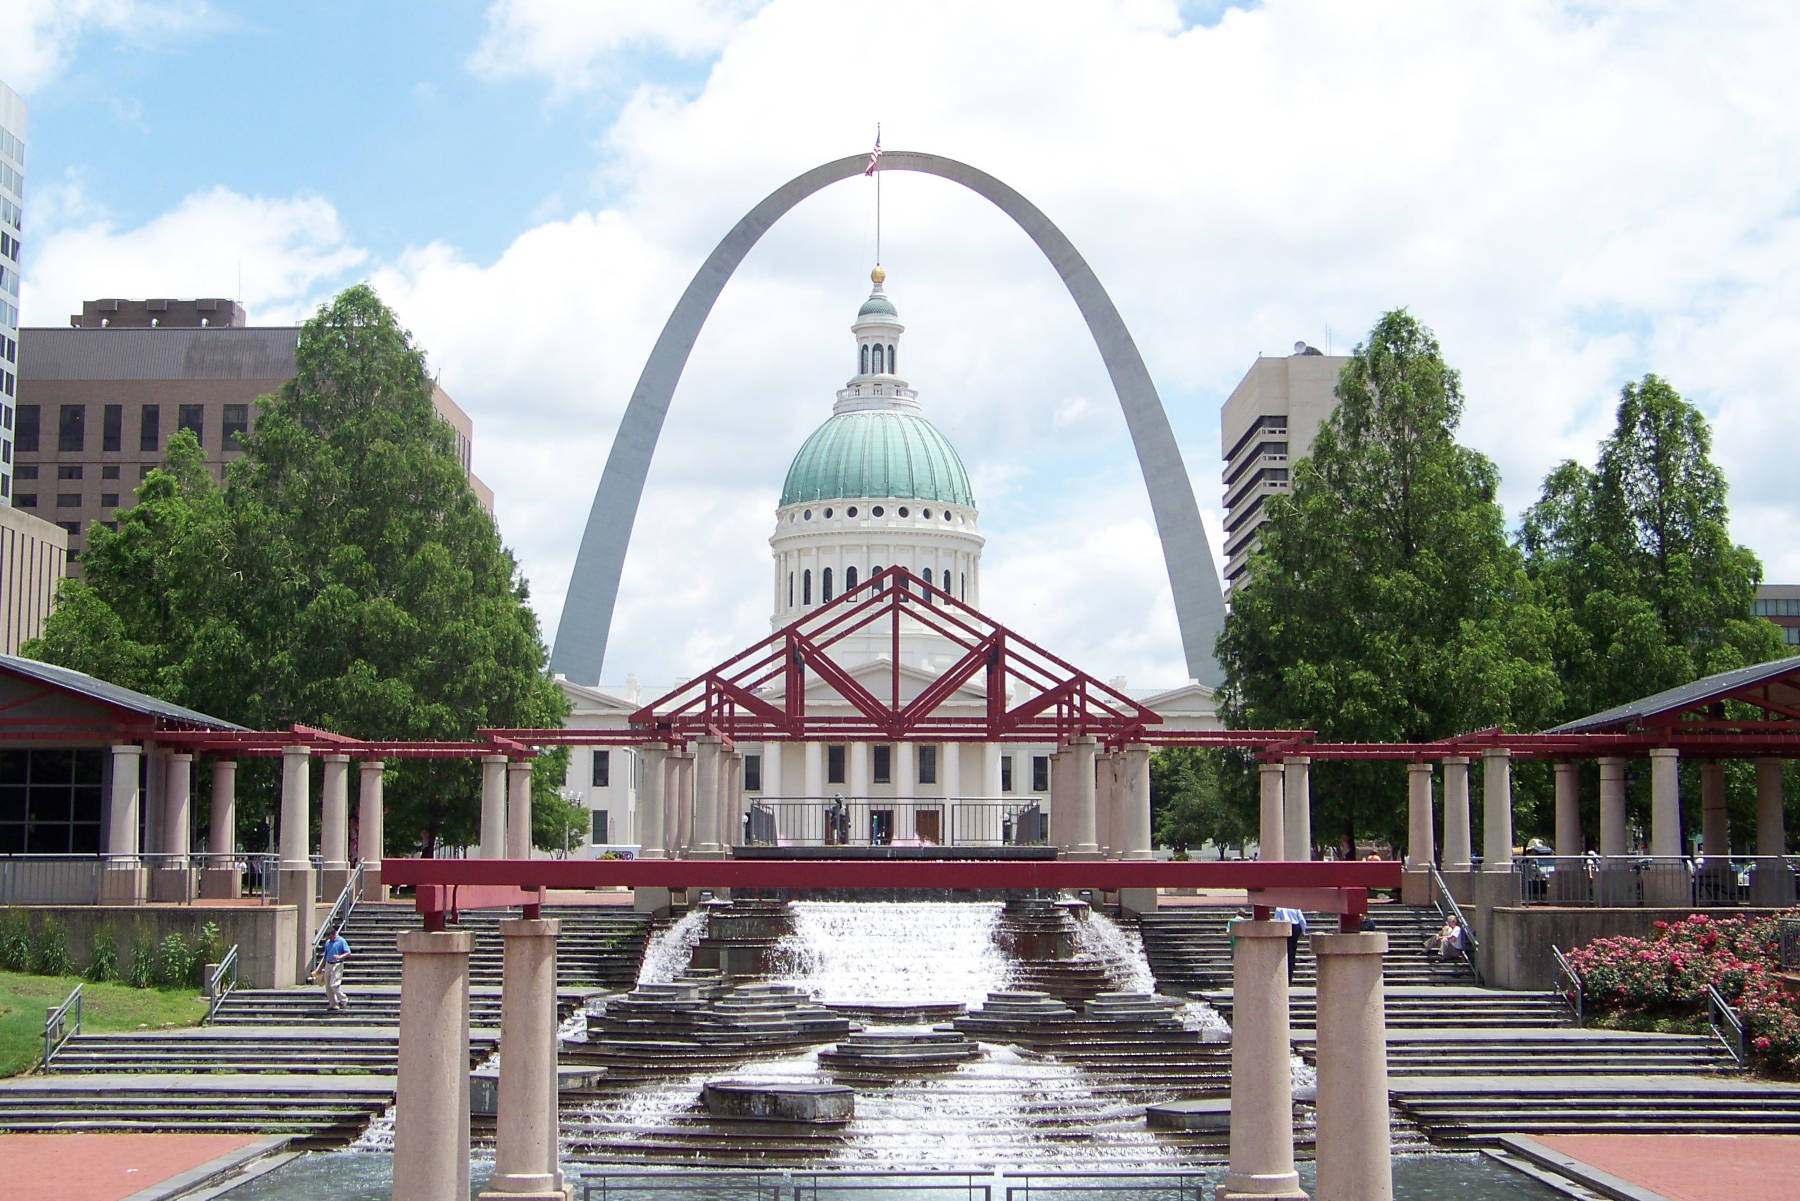 Looking at the St. Louis Arch in Downtown - HelloTrail.com